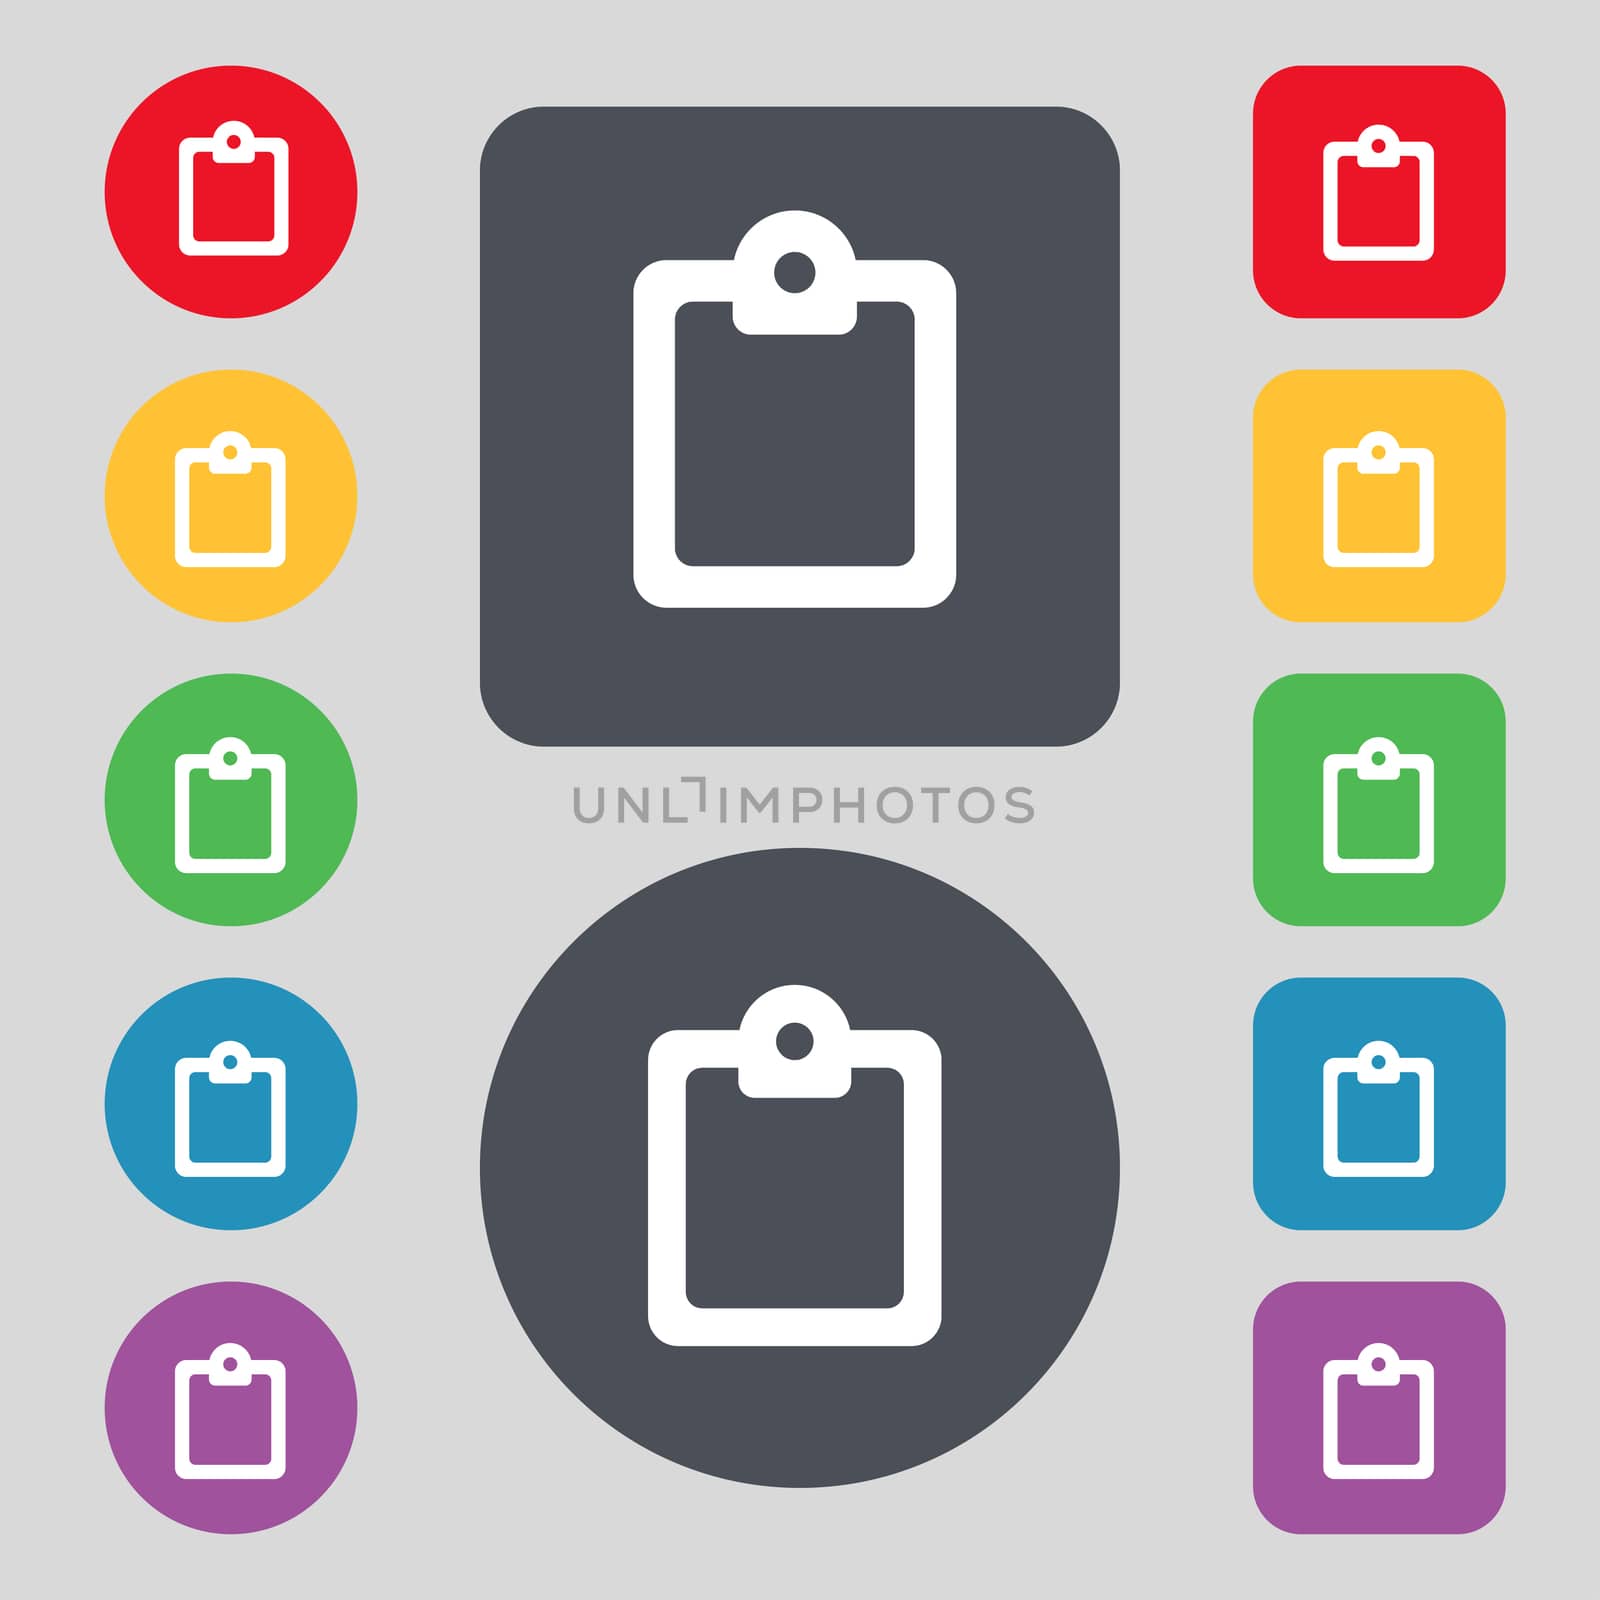 Text file icon sign. A set of 12 colored buttons. Flat design. illustration